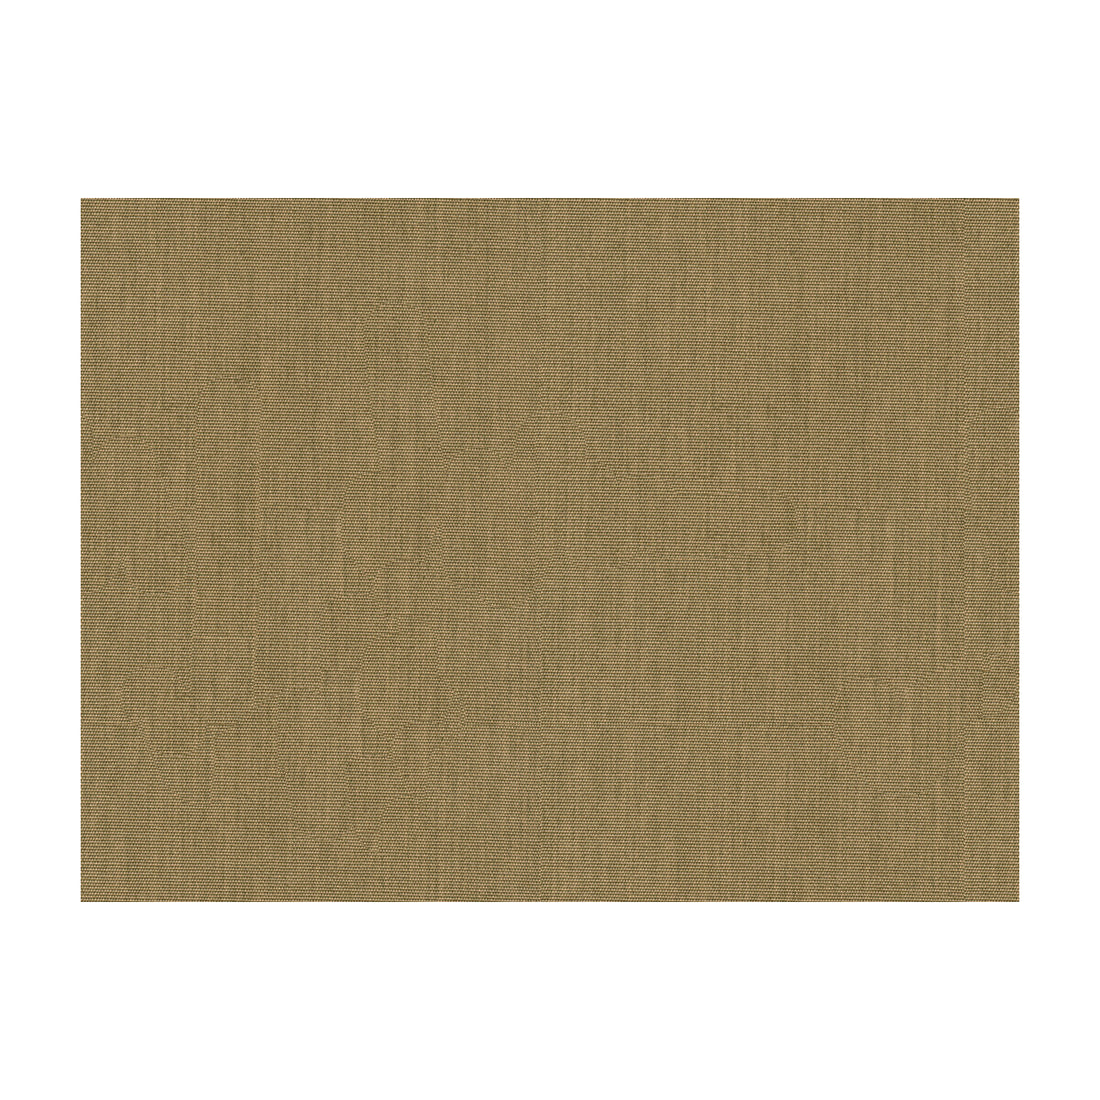 Canvas fabric in heather beige color - pattern GR-5476-0000.0.0 - by Kravet Design in the Soleil collection